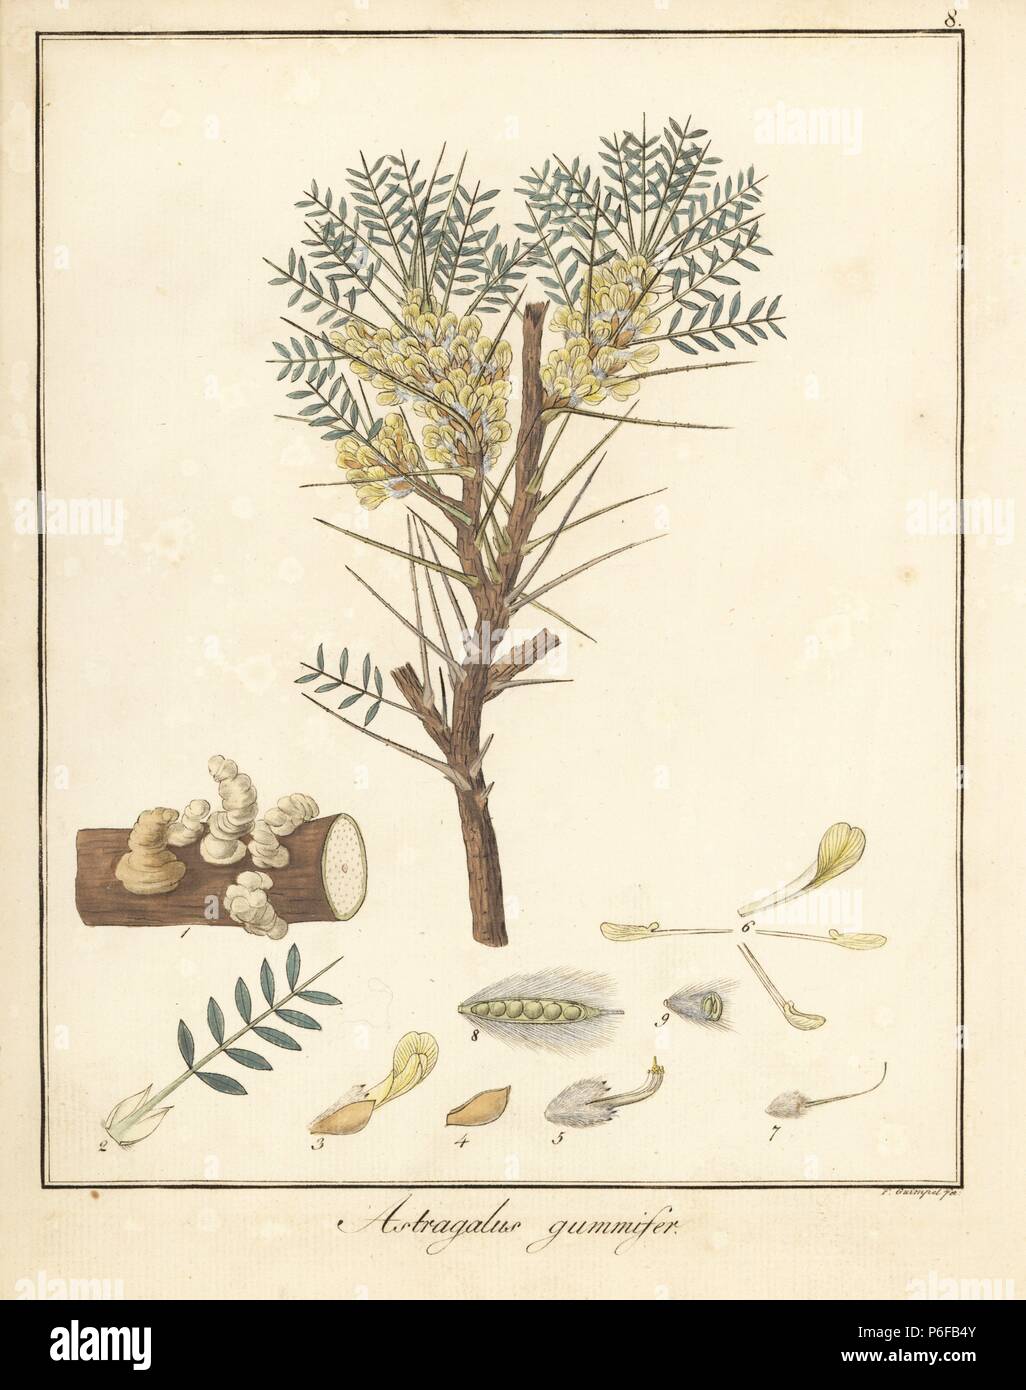 Tragacanth gum tree, Astragalus gummifer. Handcoloured copperplate engraving by F. Guimpel from Dr. Friedrich Gottlob Hayne's Medical Botany, Berlin, 1822. Hayne (1763-1832) was a German botanist, apothecary and professor of pharmaceutical botany at Berlin University. Stock Photo